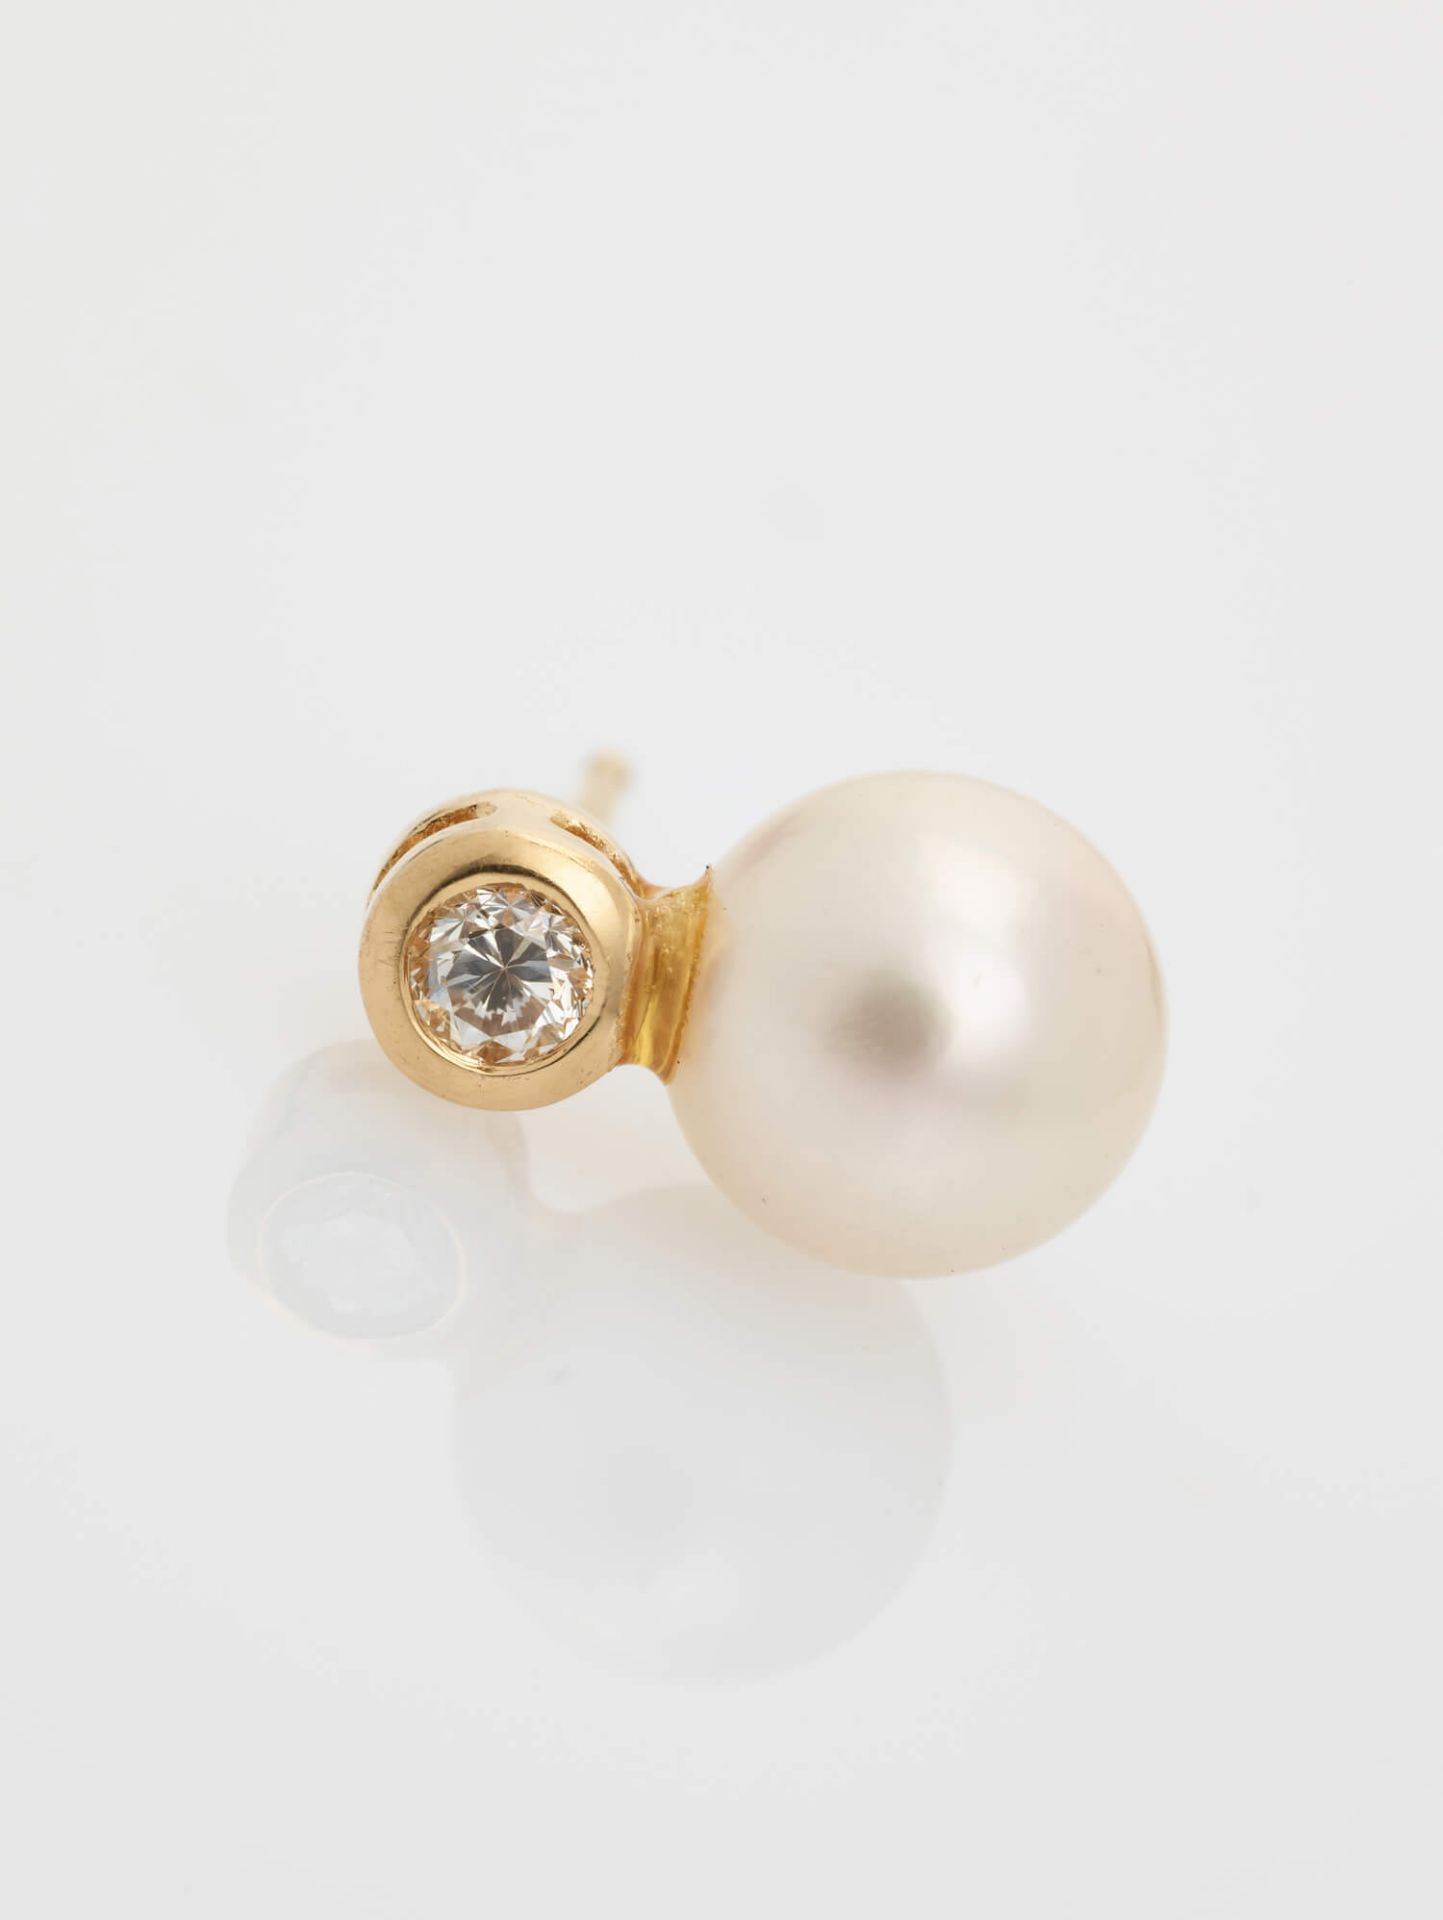 A PAIR OF 14 CARAT YELLOW GOLD EAR STUDS WITH PEARLS AND DIAMONDS hallmarked ‘14K’ and with a - Image 2 of 5